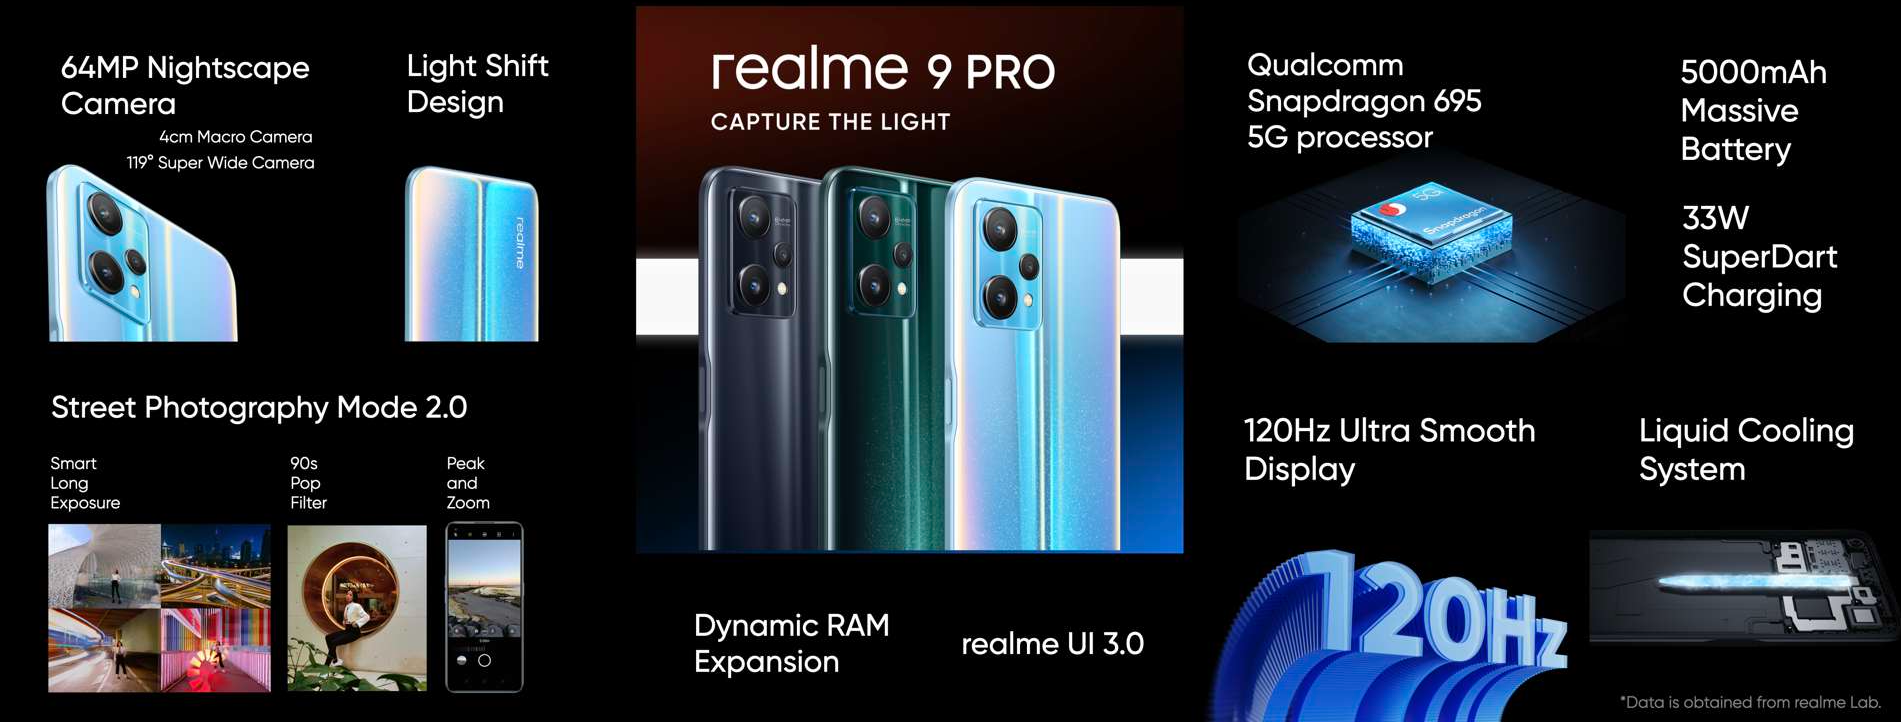 Realme 9 Pro+ review: An eye-catching and affordable mid-range 5G